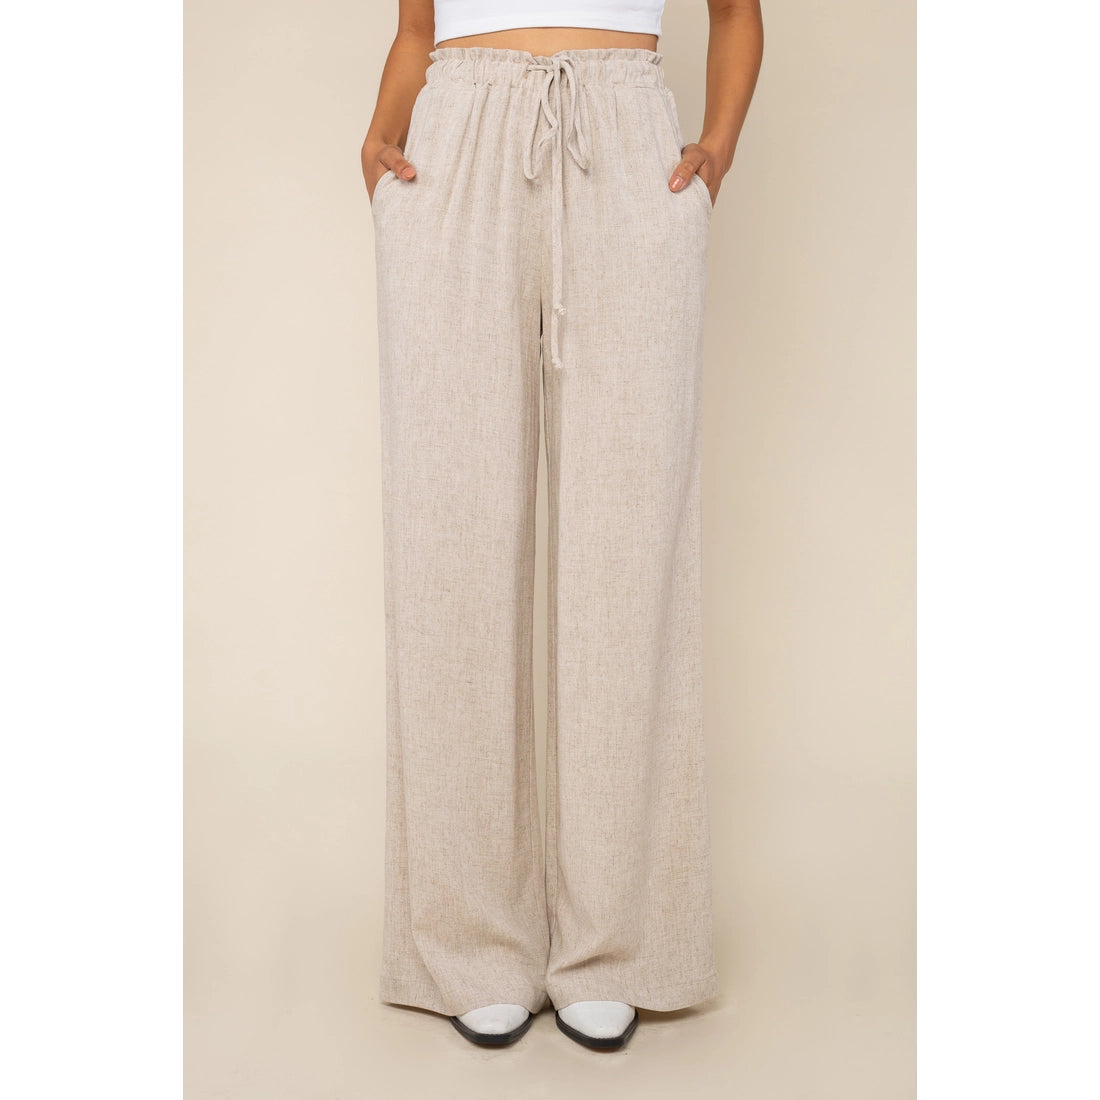 The Cove Pant